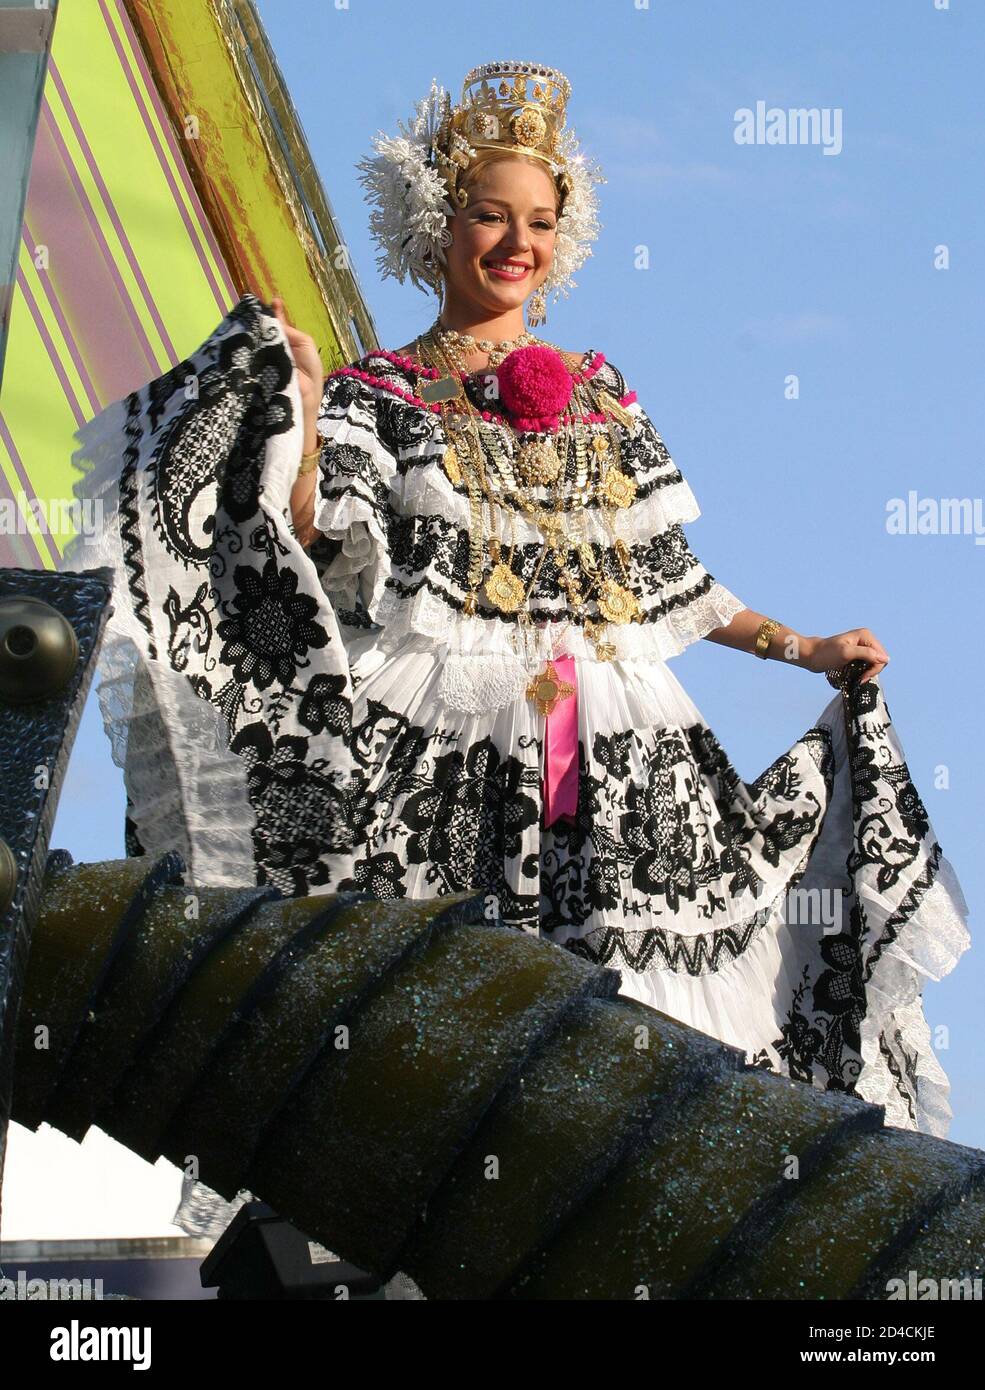 Carnival queen Ana Karina Abrego rides atop a float during Carnival  celebrations in Panama City, February 6 2005. In Panama, the popular,  internationally-known doll 'Barbie' was modeled after Abrego. Carnival  festivities will